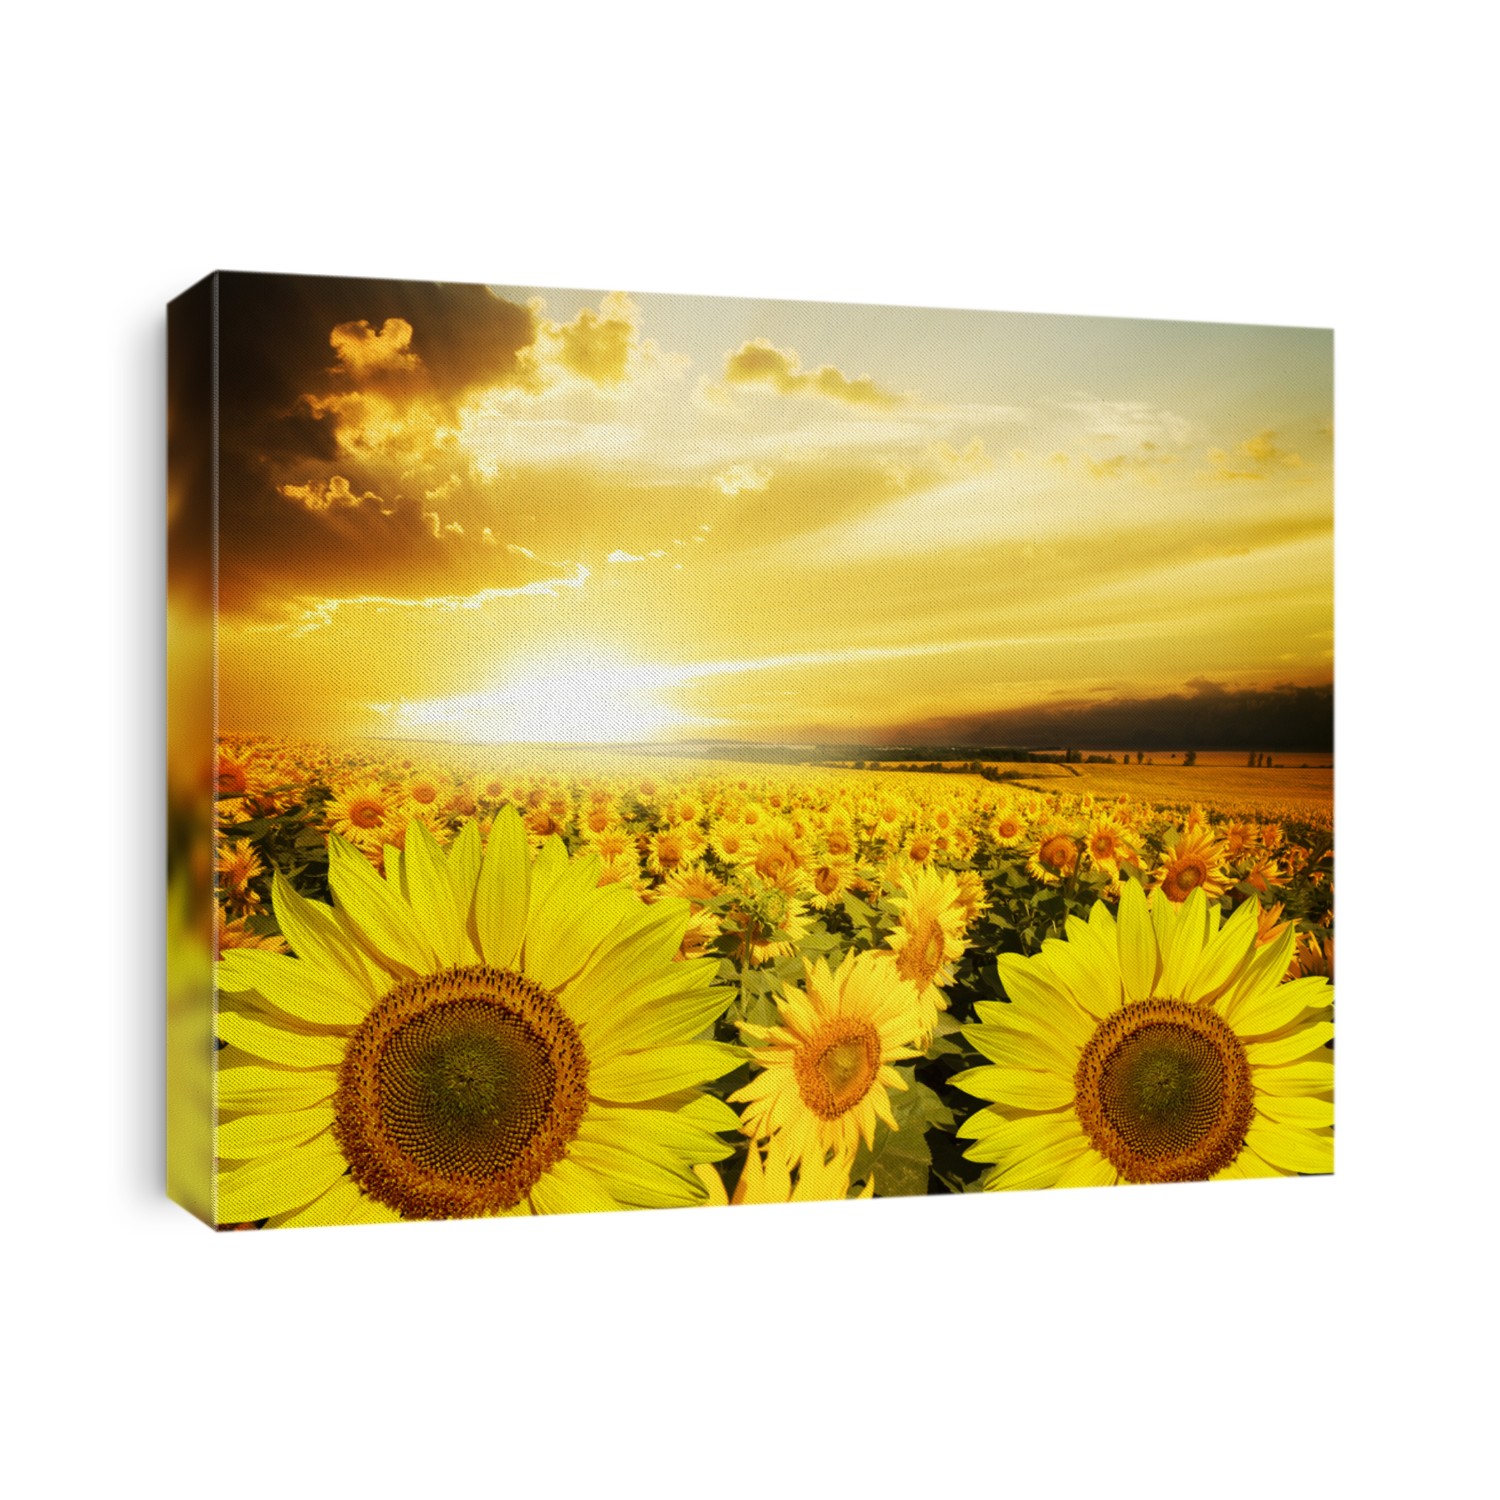 Field of flowers sunflowers on a background sunset